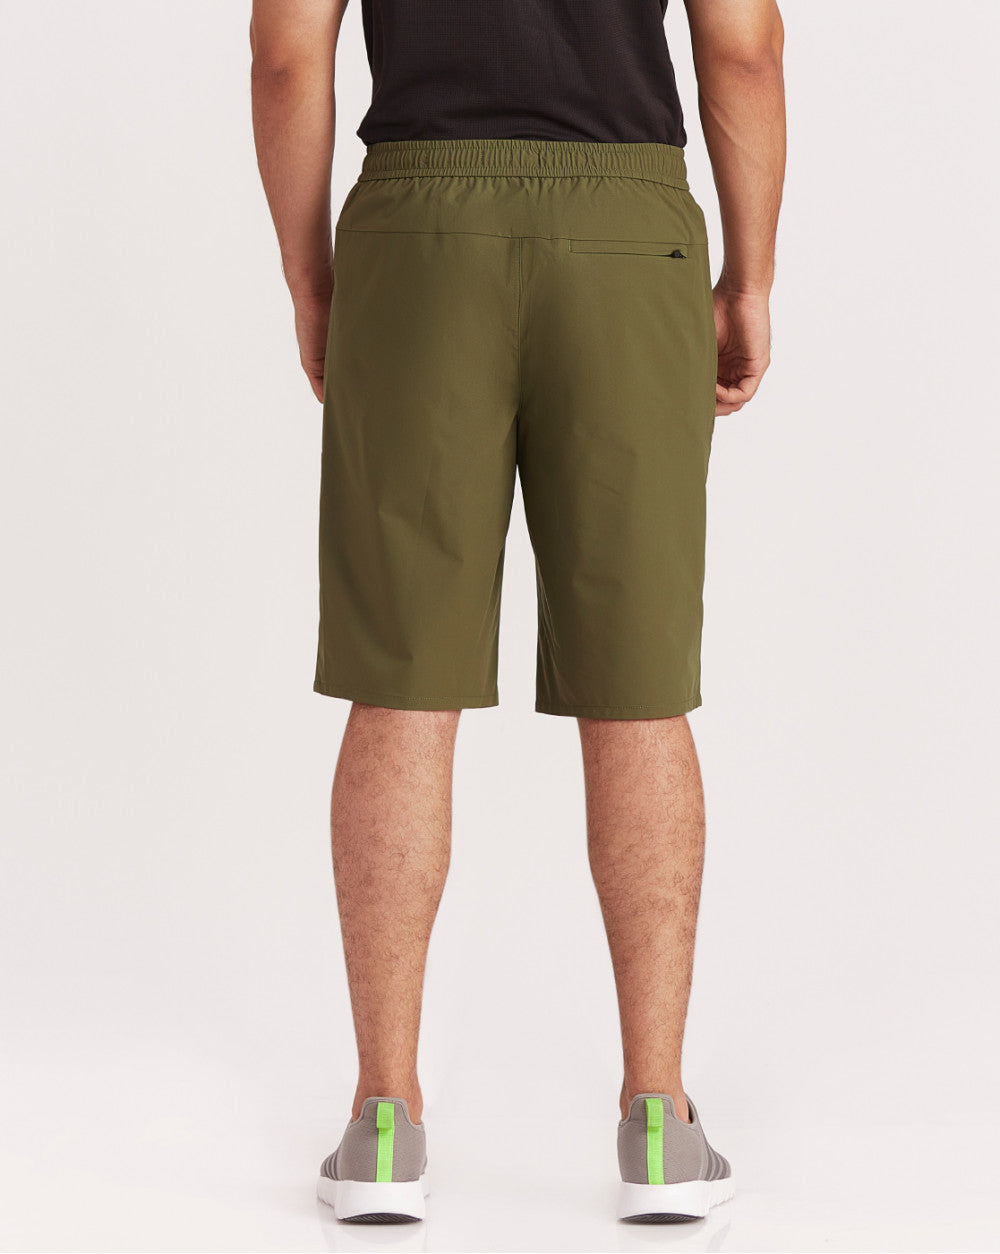 Active Tech Shorts - Olive